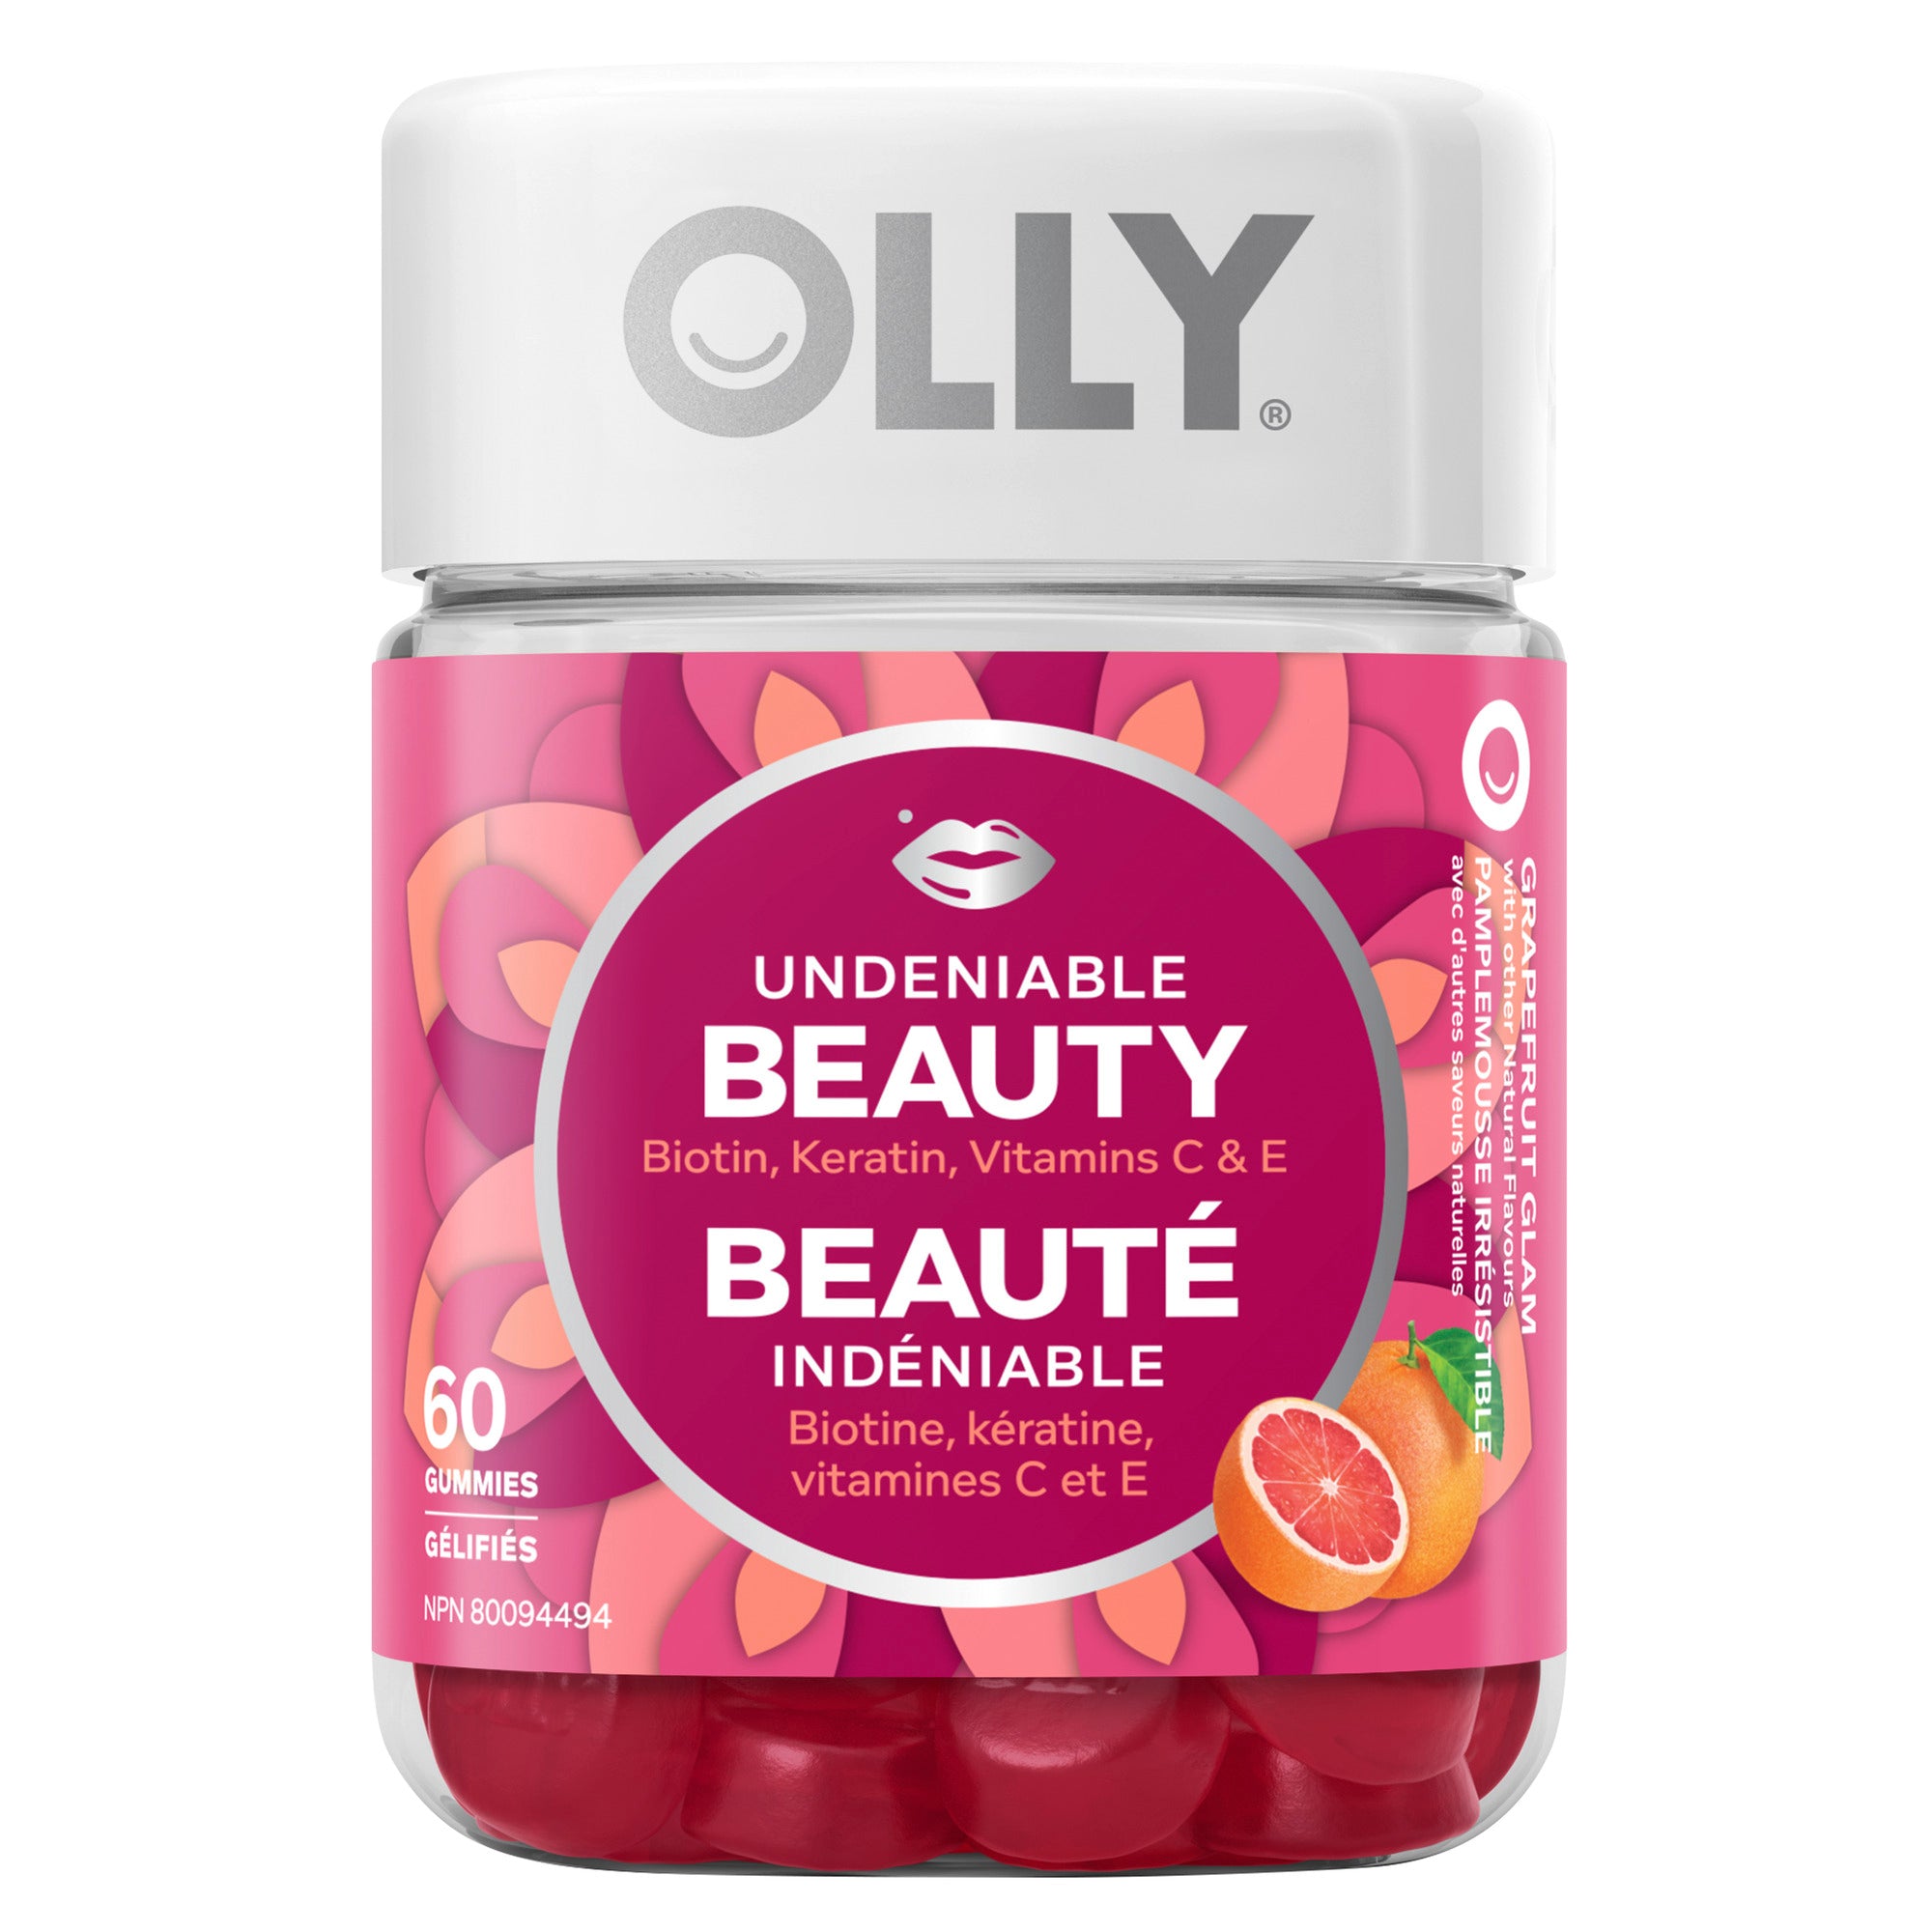 Showing the front side of the pink OLLY Undeniable Beauty 60 Gummies container. 